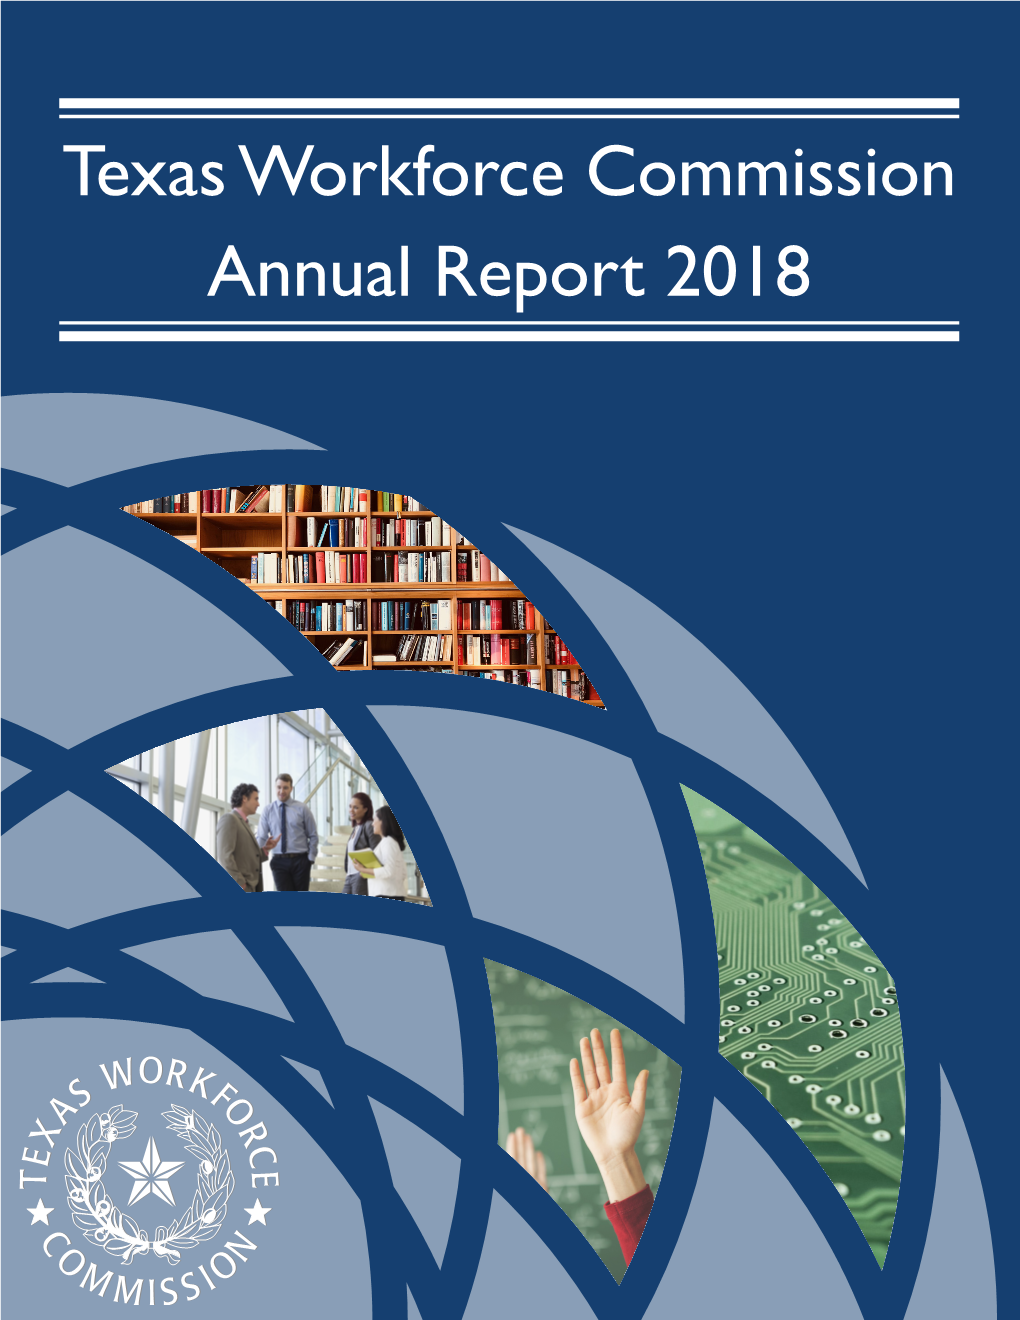 Texas Workforce Commission Annual Report 2018 Table of Contents